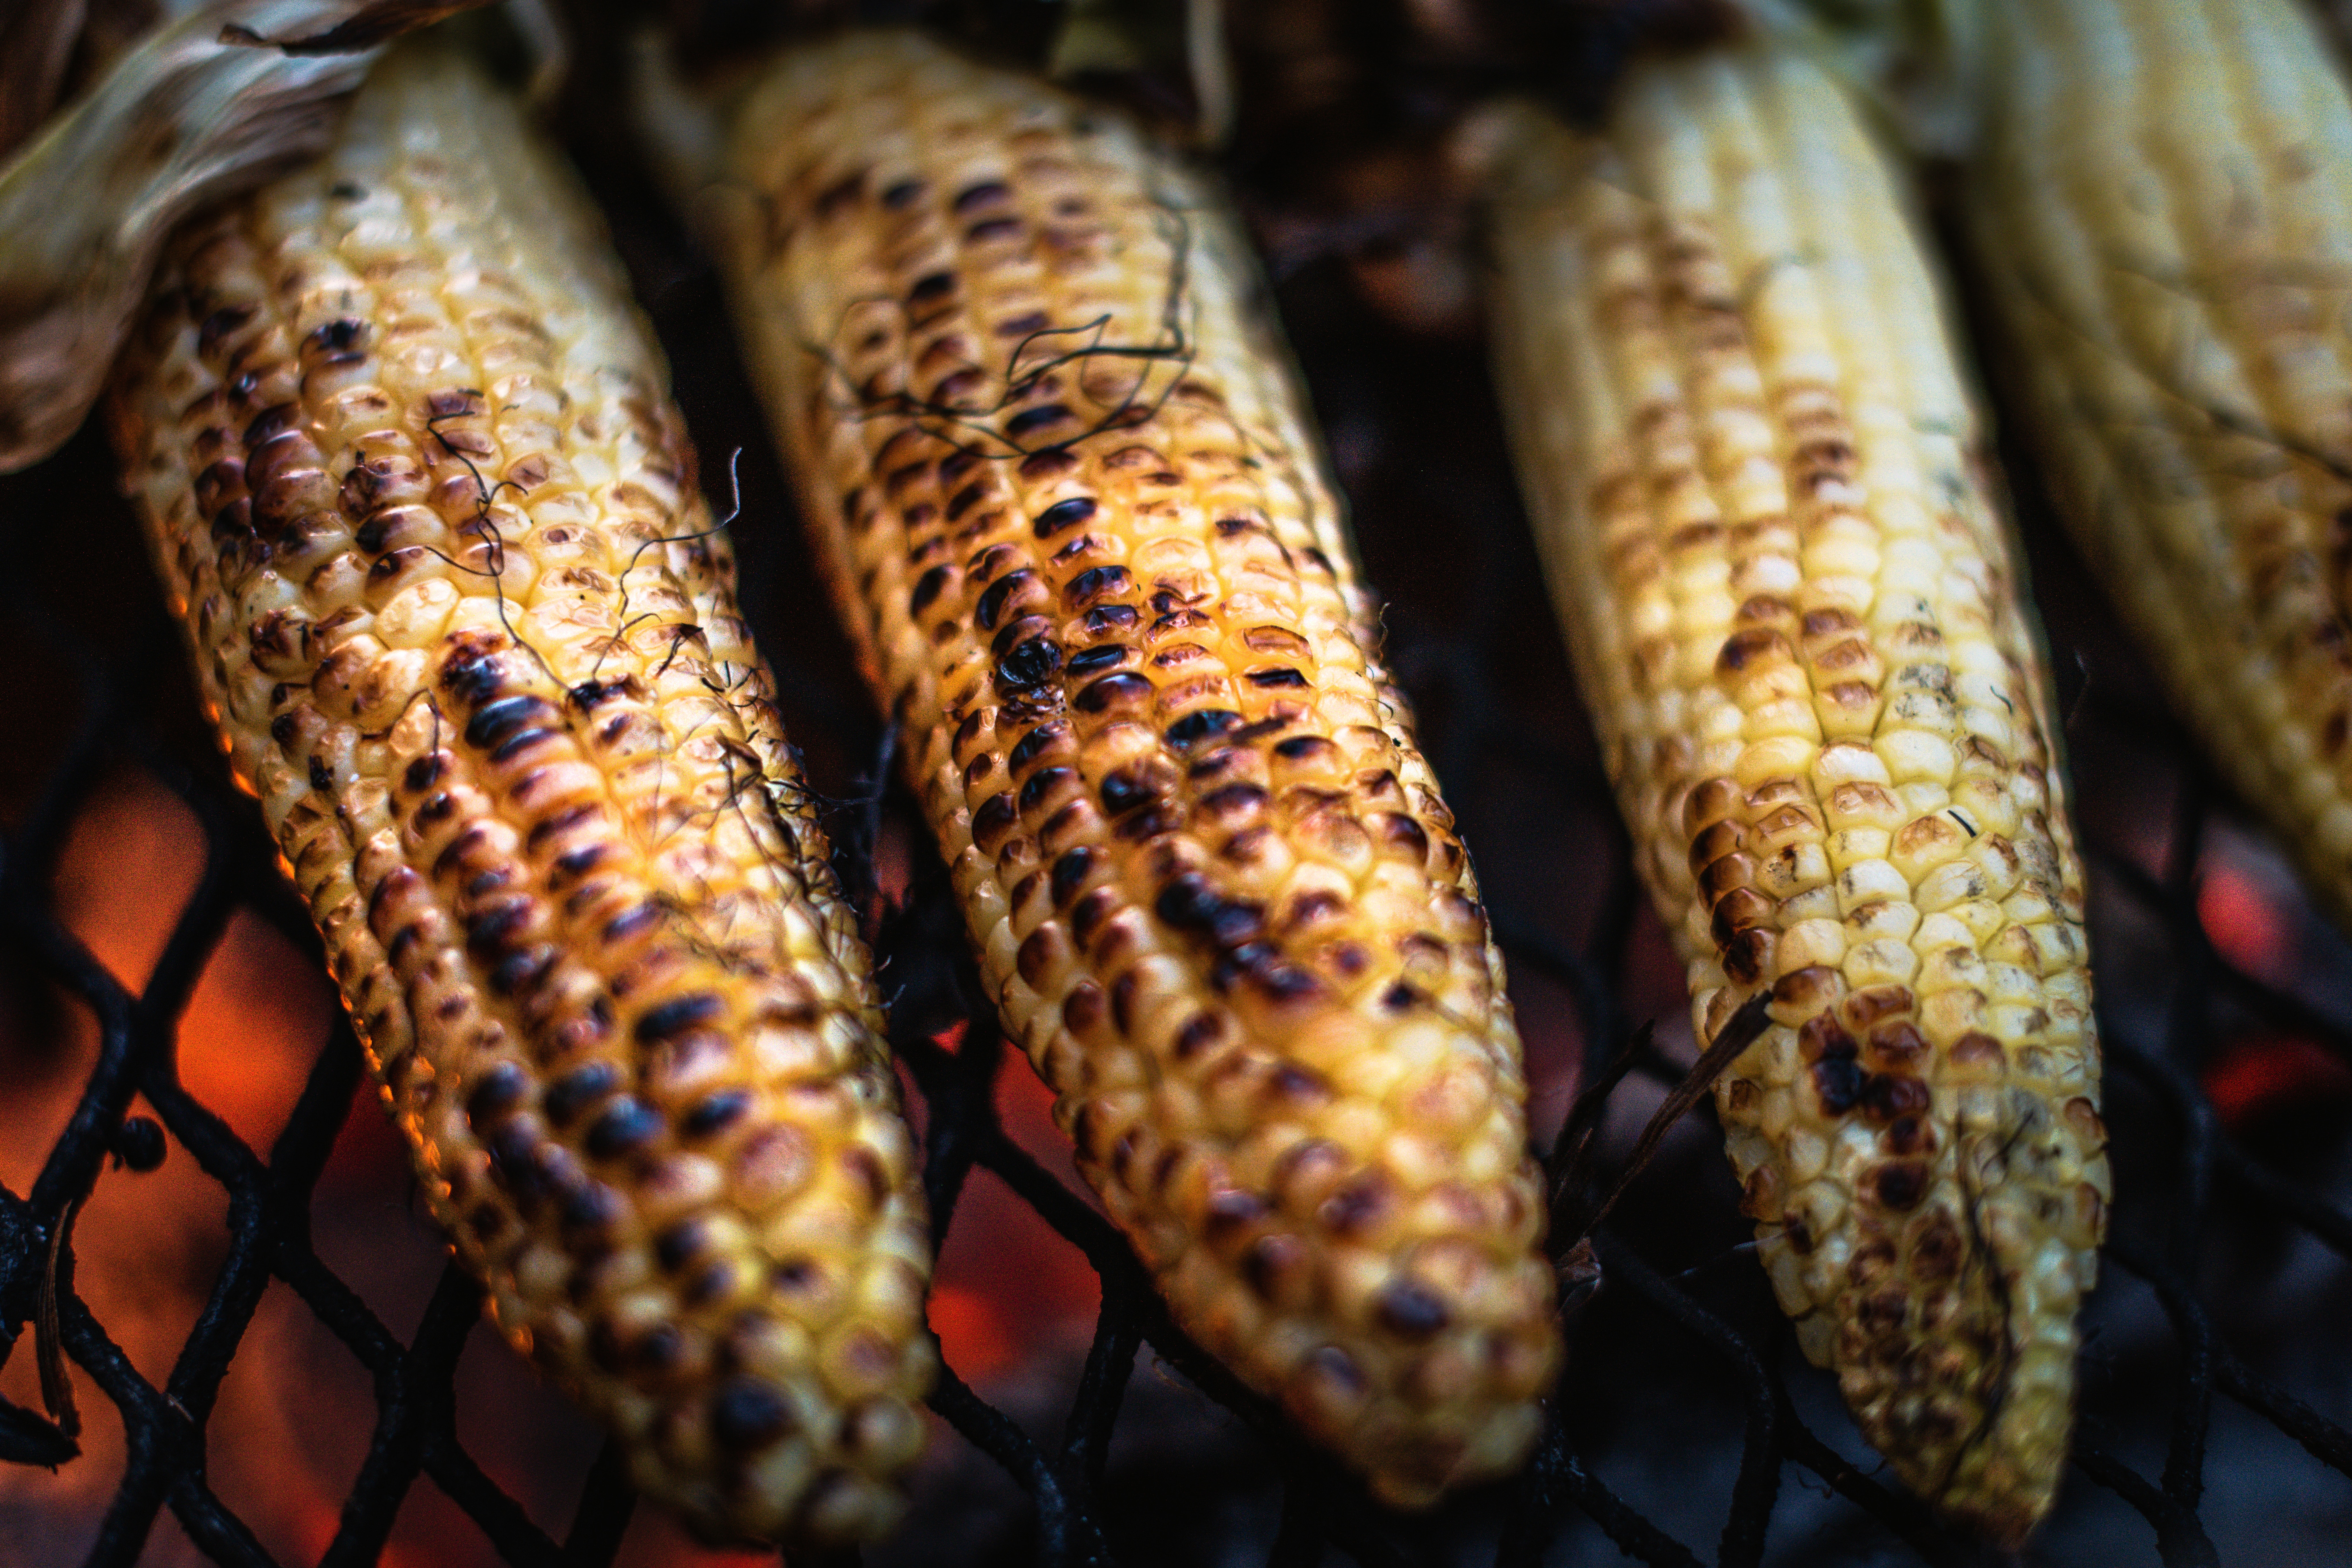 Free Roasted Corn Festival is taking place this weekend in San Antonio